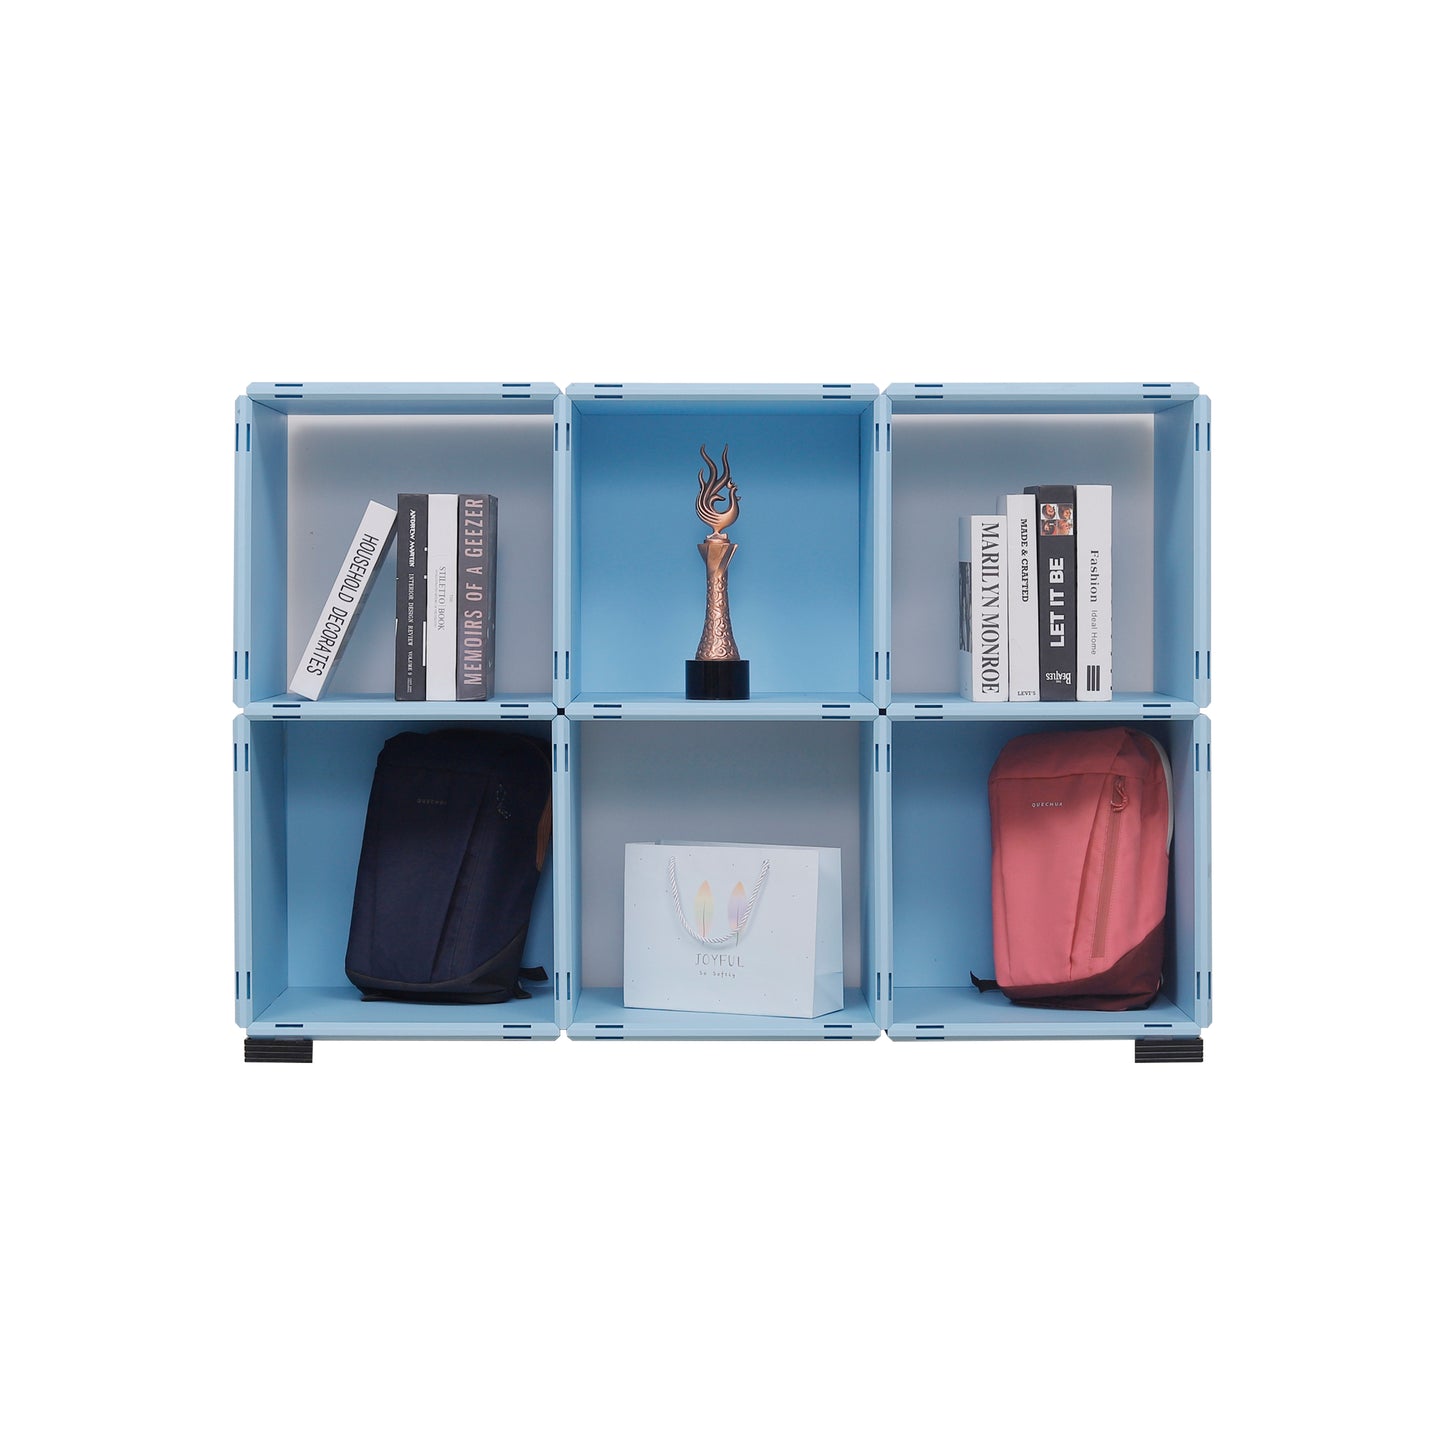 DIY Portable Storage Organizer Decorate storage cabinets 20 pieces 14.2"x14.2" ABS environmental material, variety assembly, storage, TV bench, end table, shoe cabinet plastic locker